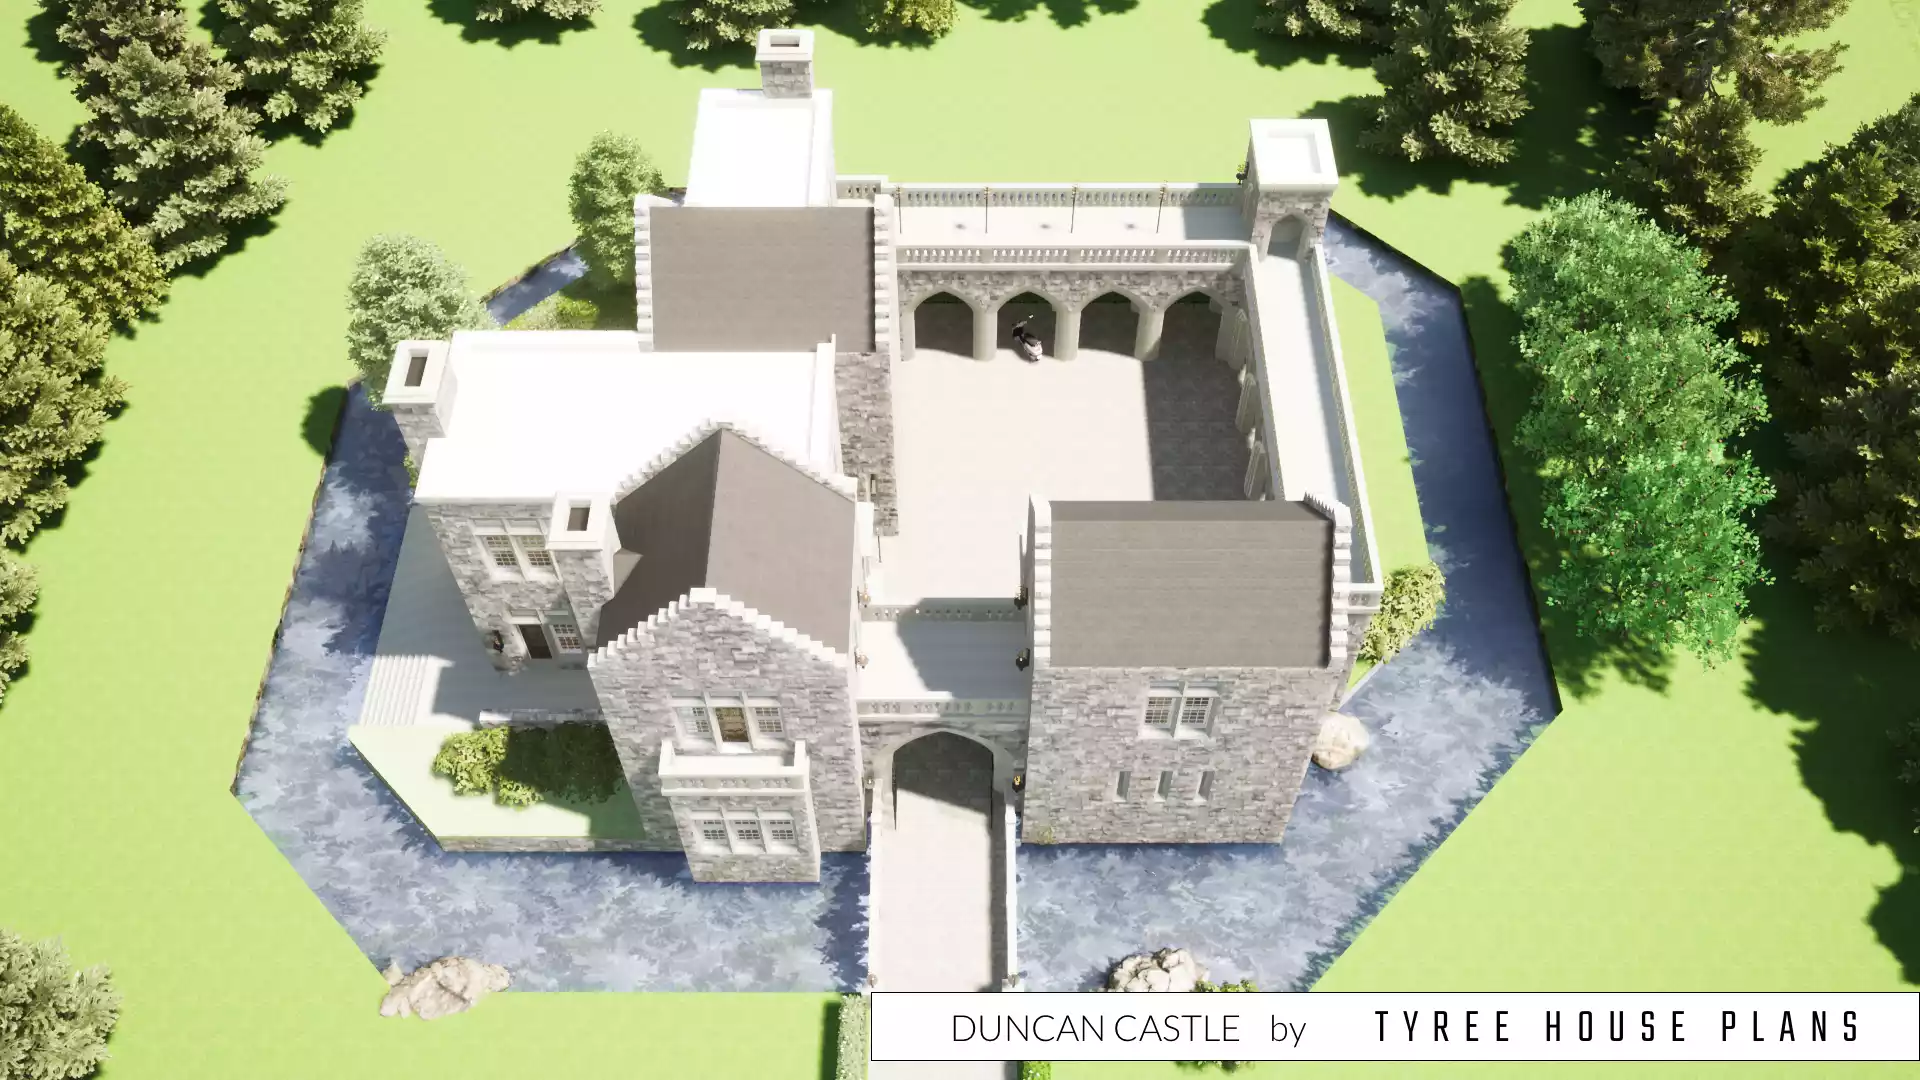 View from above. Duncan Castle by Tyree House Plans.